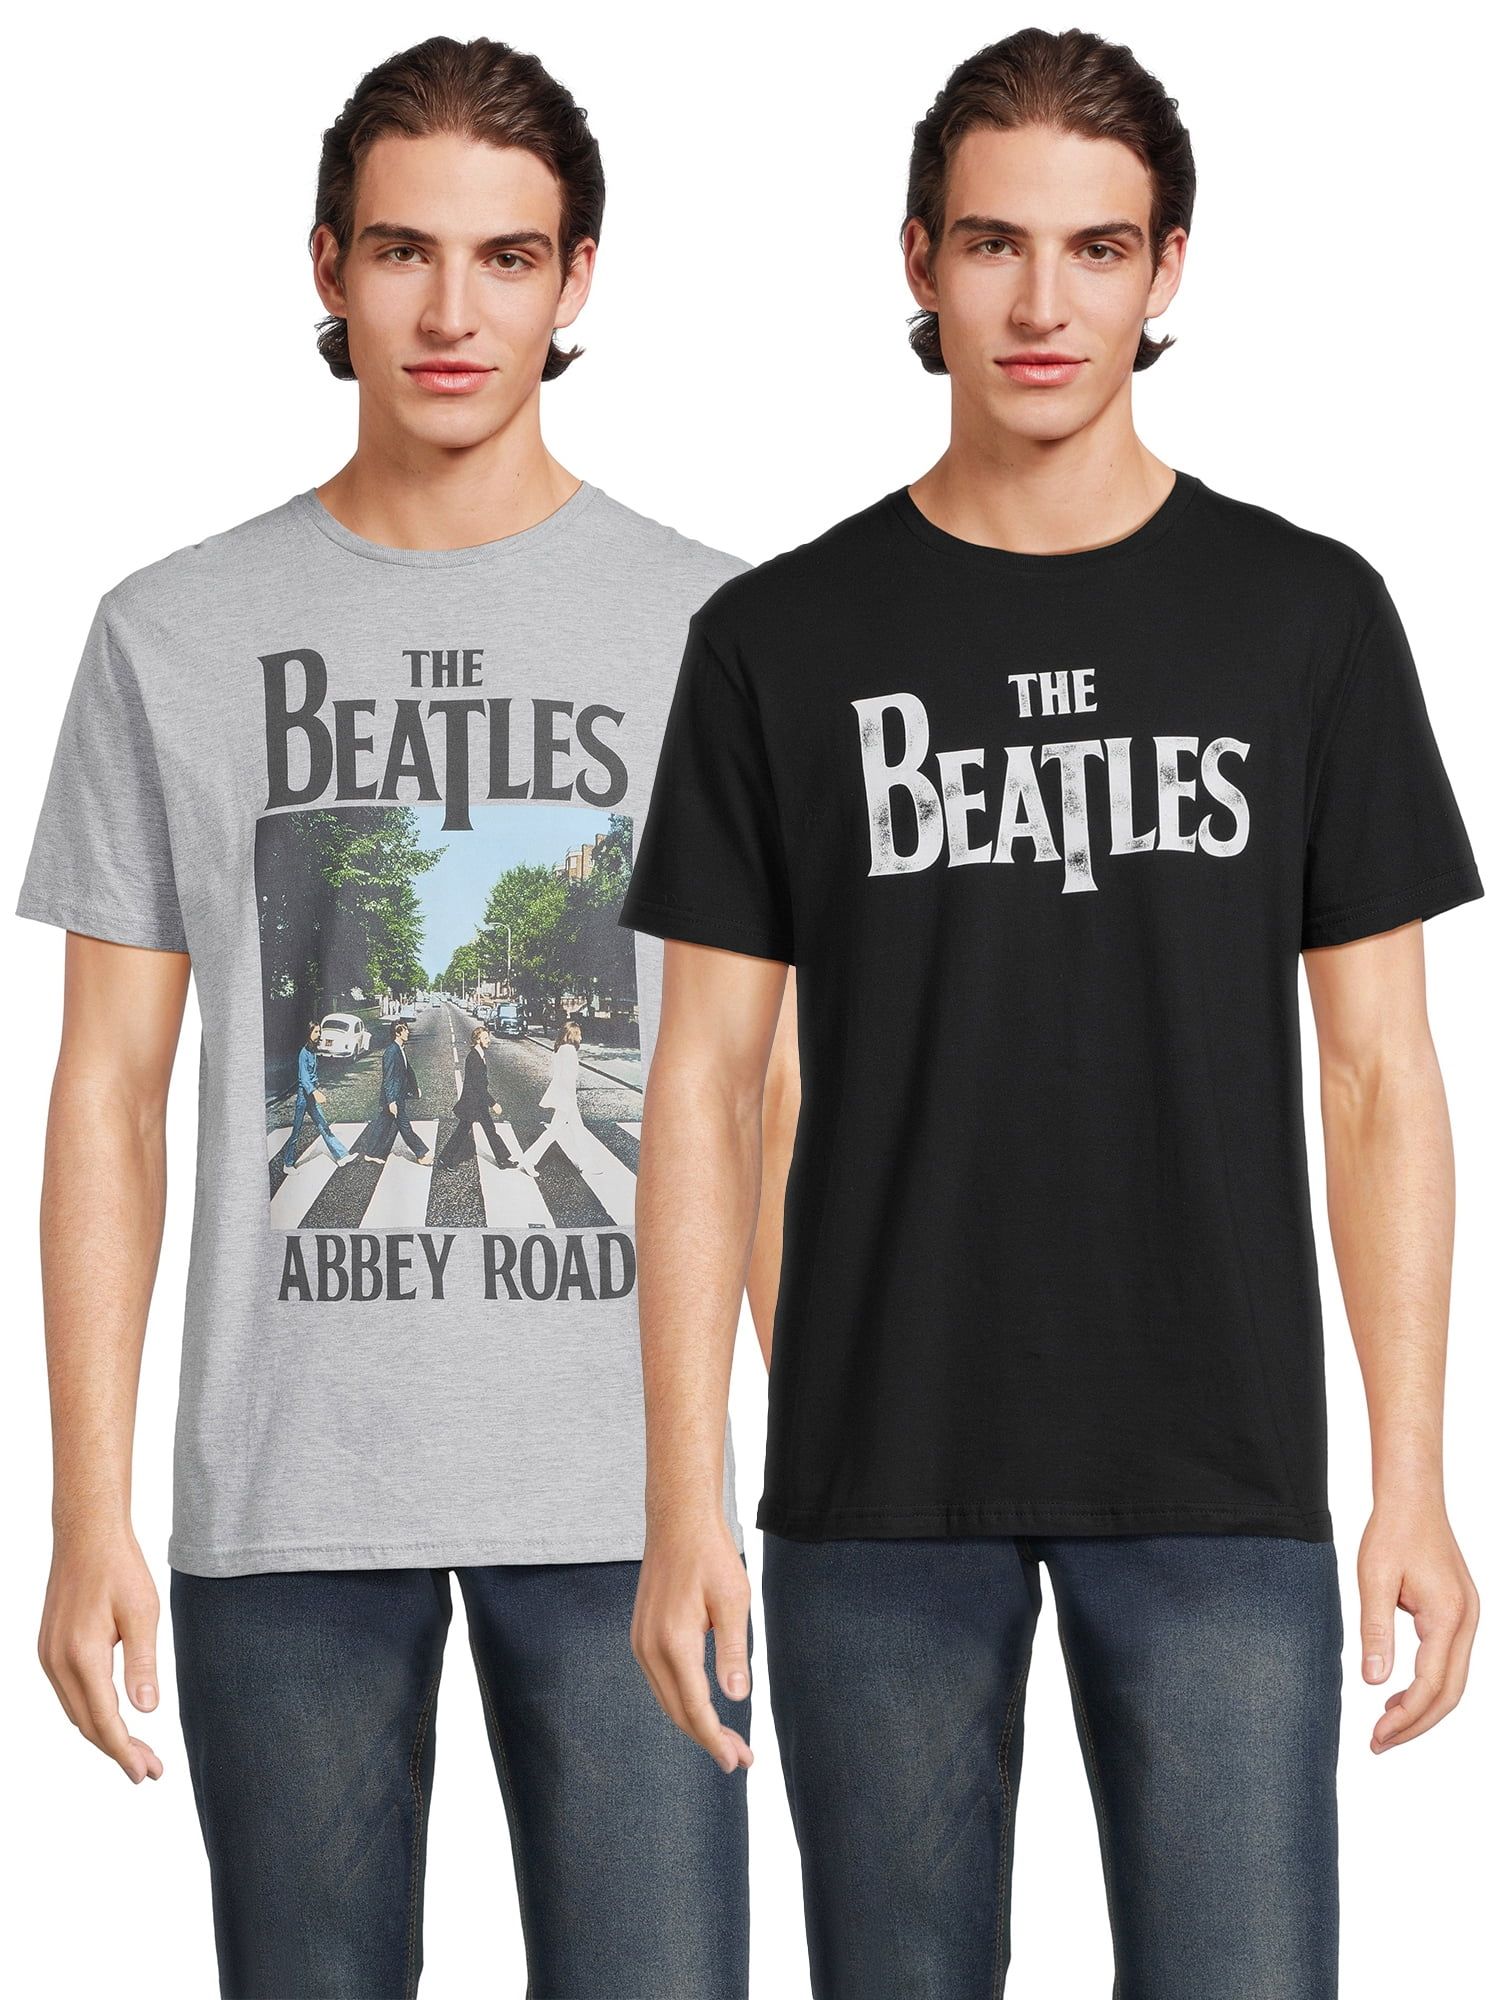 The Beatles Men’s and Big Men’s Short Sleeve Graphic Tee, 2-Pack, Sizes S-3XL | Walmart (US)